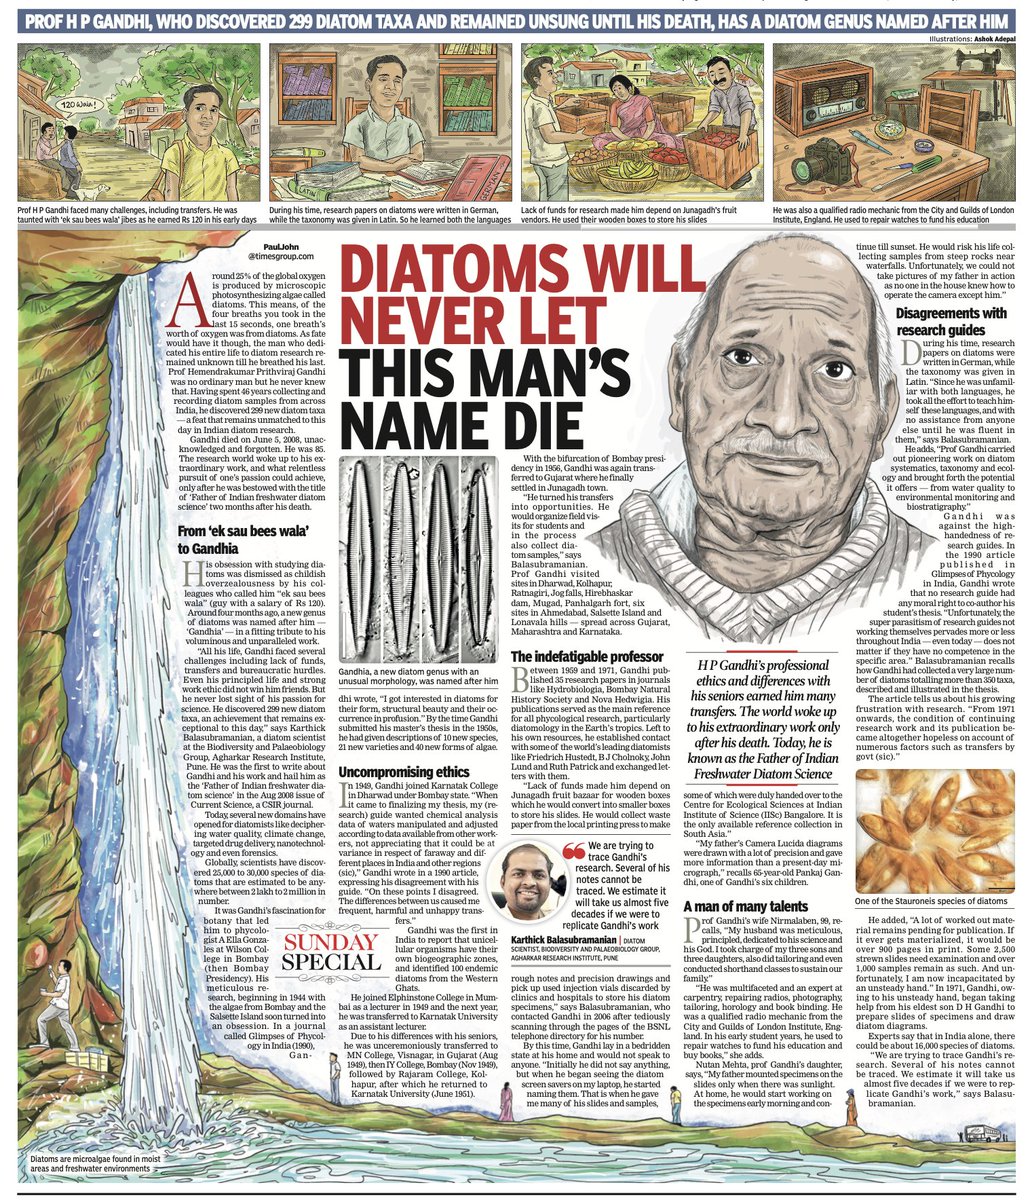 The article highlights the life and legacy of 𝐇𝐏 𝐆𝐚𝐧𝐝𝐡𝐢 and his significant contribution to #diatom research in the Ahmedabad edition of @timesofindia, by @pauljohntoi. Another unsung hero in the world of Indian science.